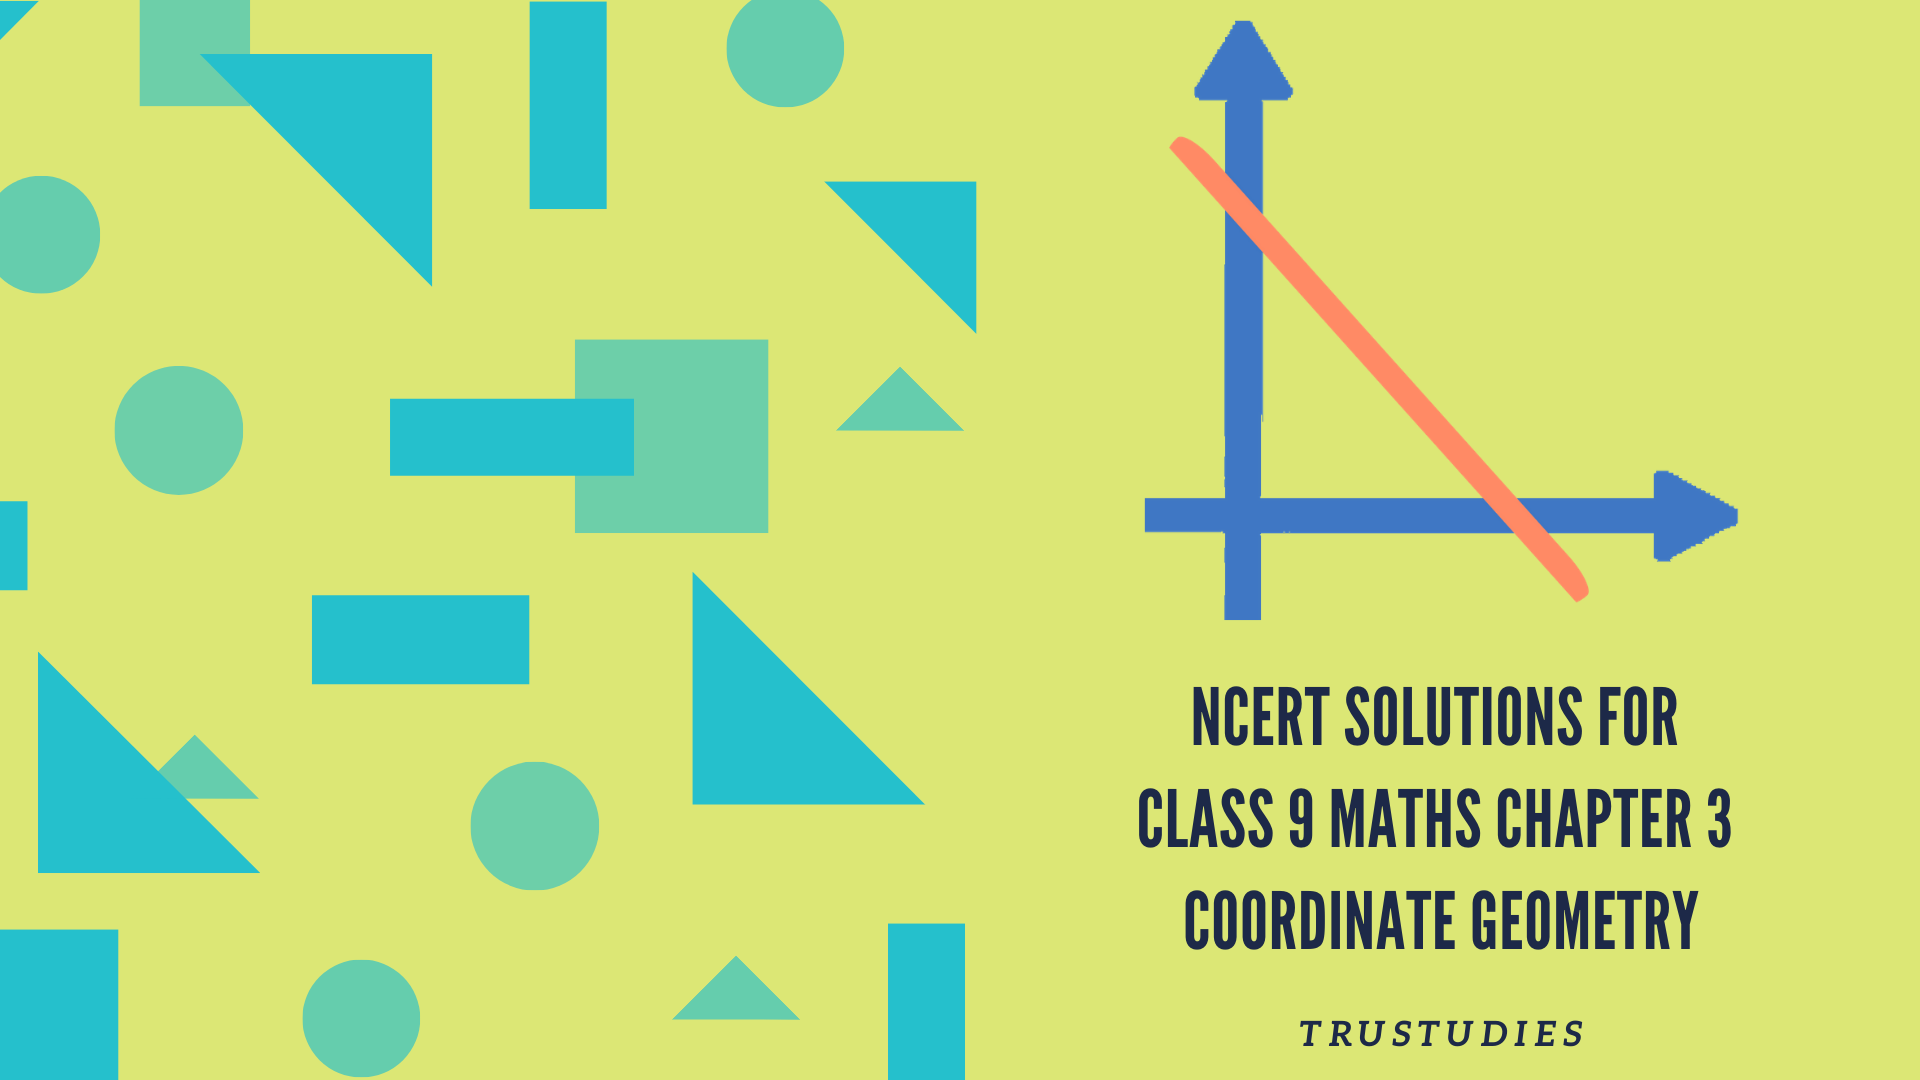 NCERT solutions for class 9 maths chapter 3 coordinate geometry banner image